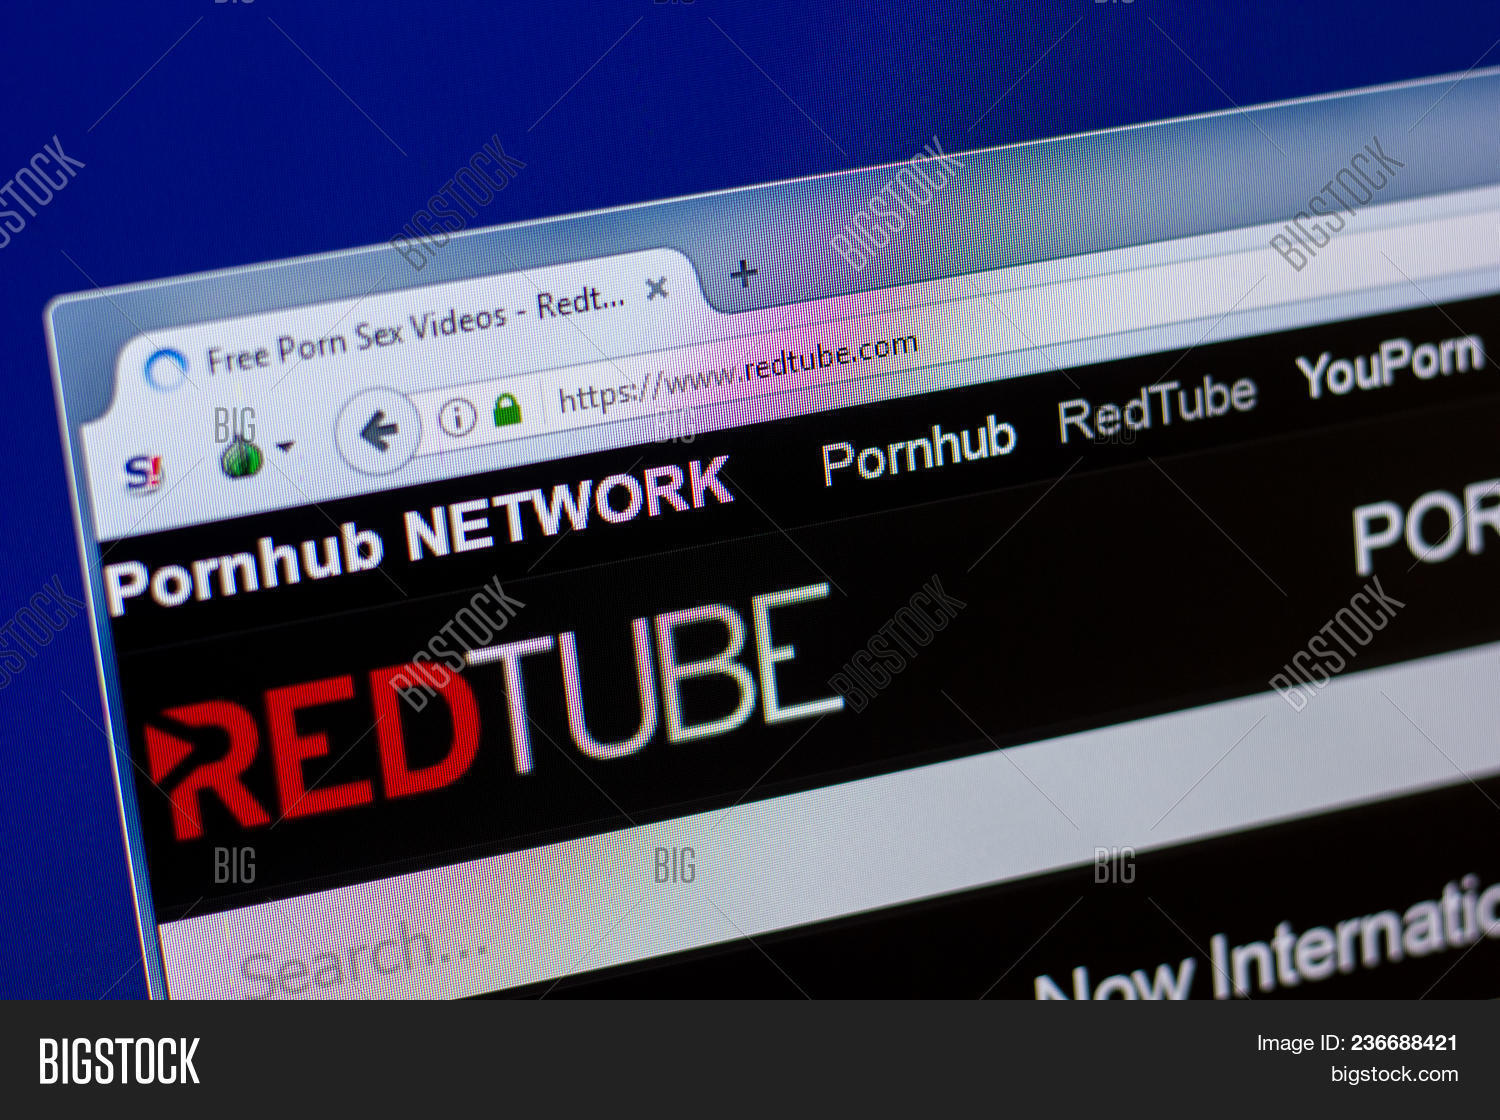 How to sign into red tube online